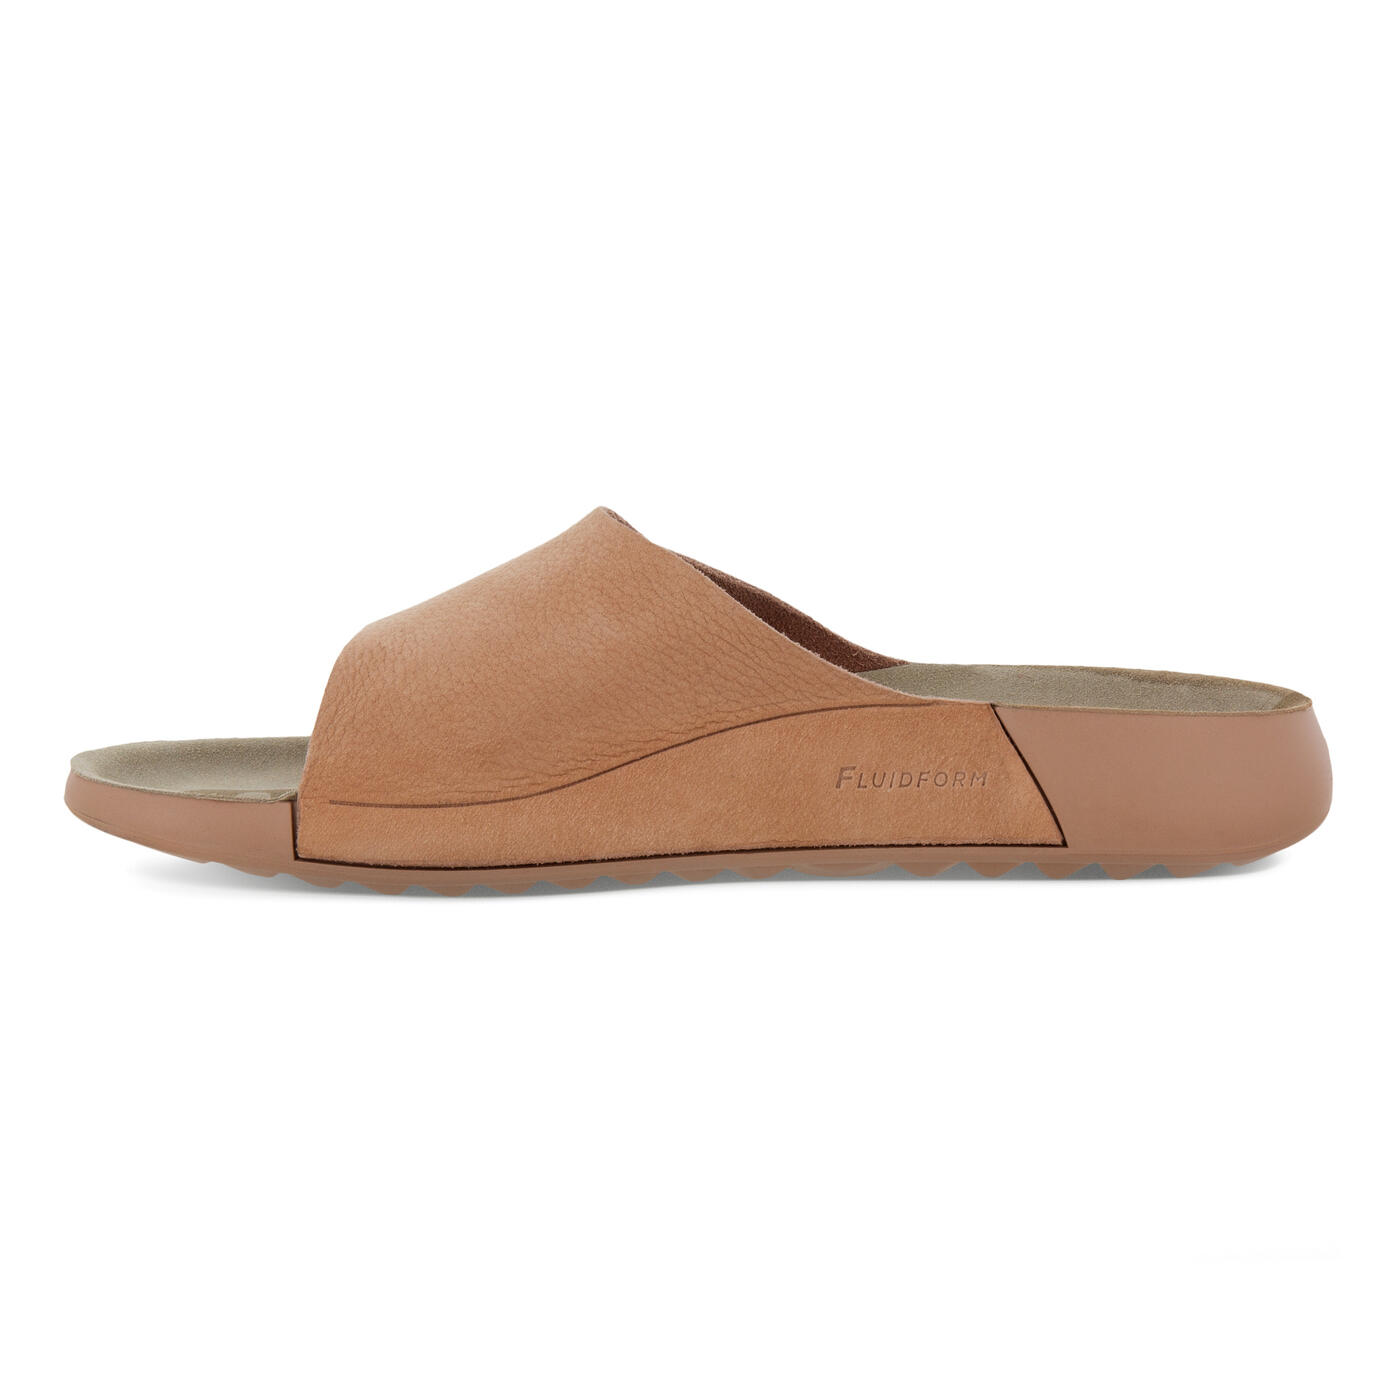 ECCO COZMO | Buy leather sandals for women | ECCO® Shoes